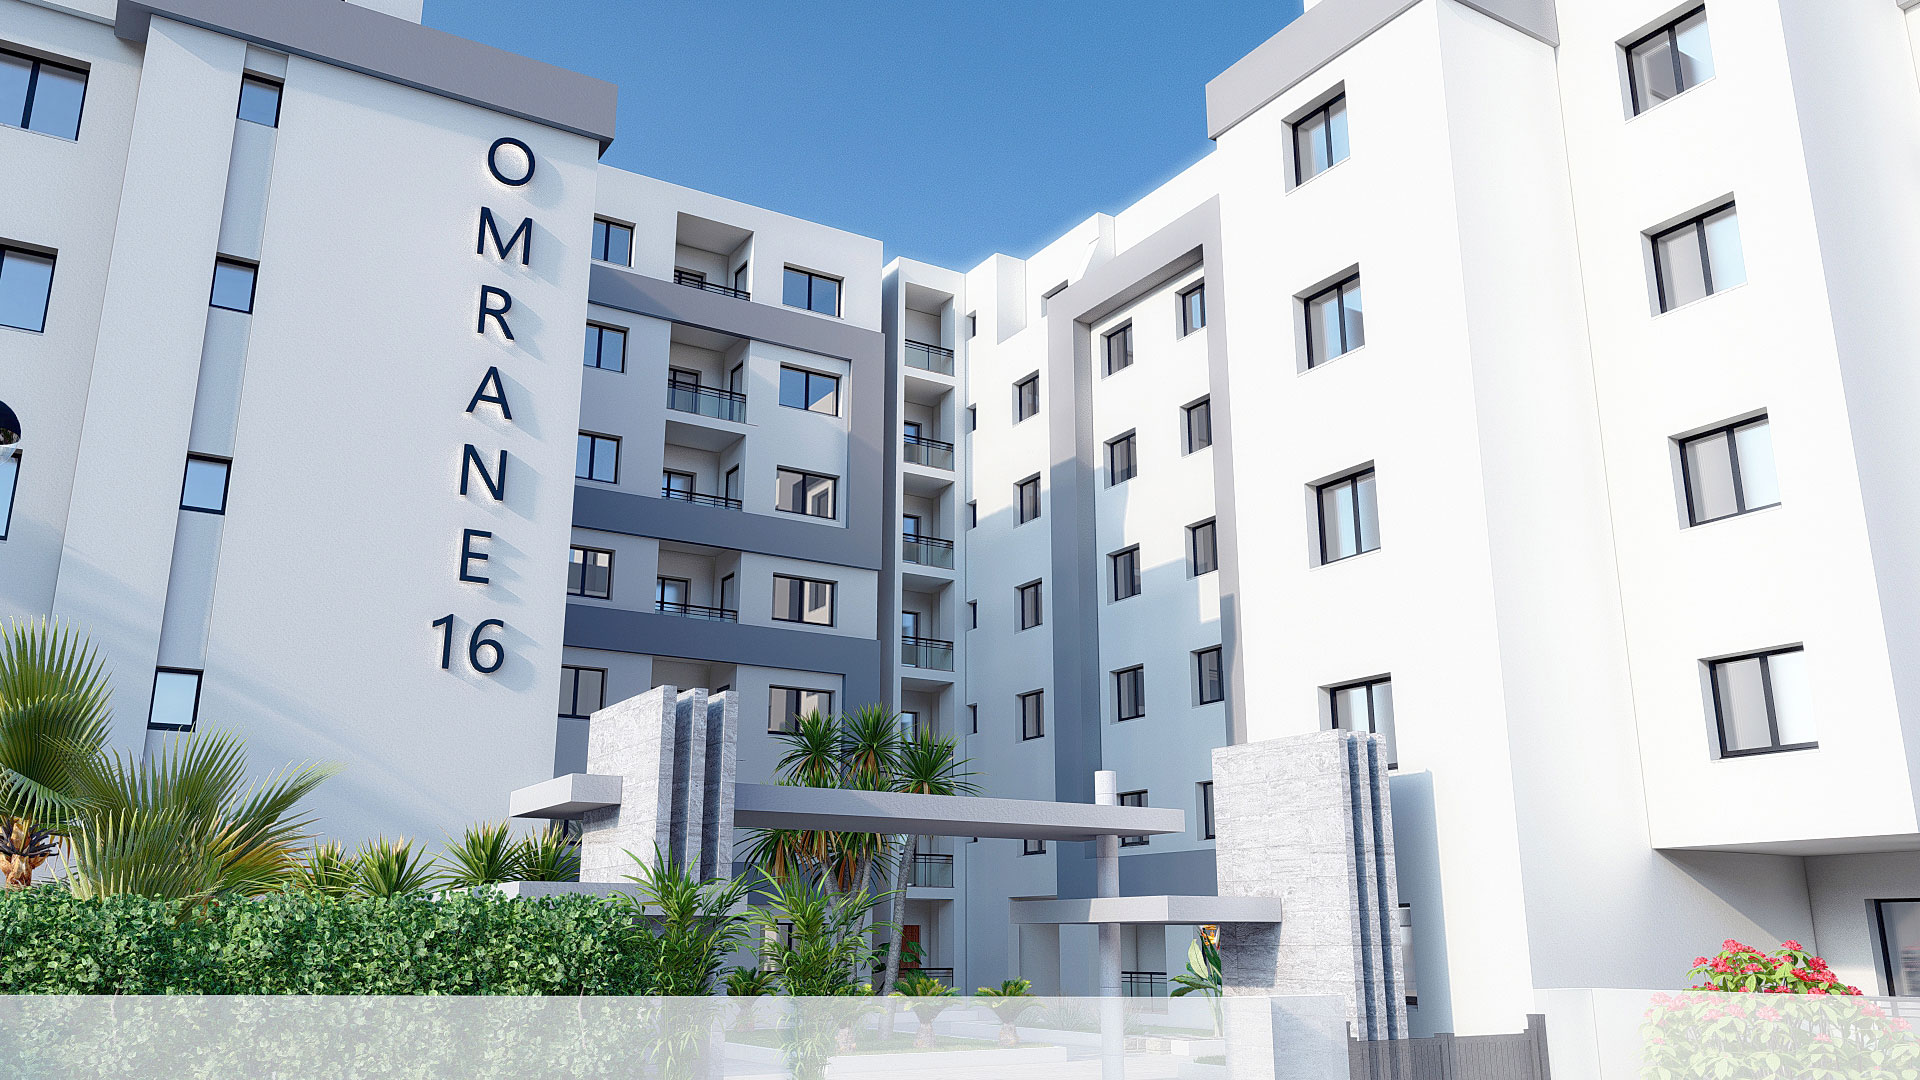 residence-omrane-16-immobiliere-du-maghreb-cite-el-ghazela-immobilier-appartement-tunisie-1-8